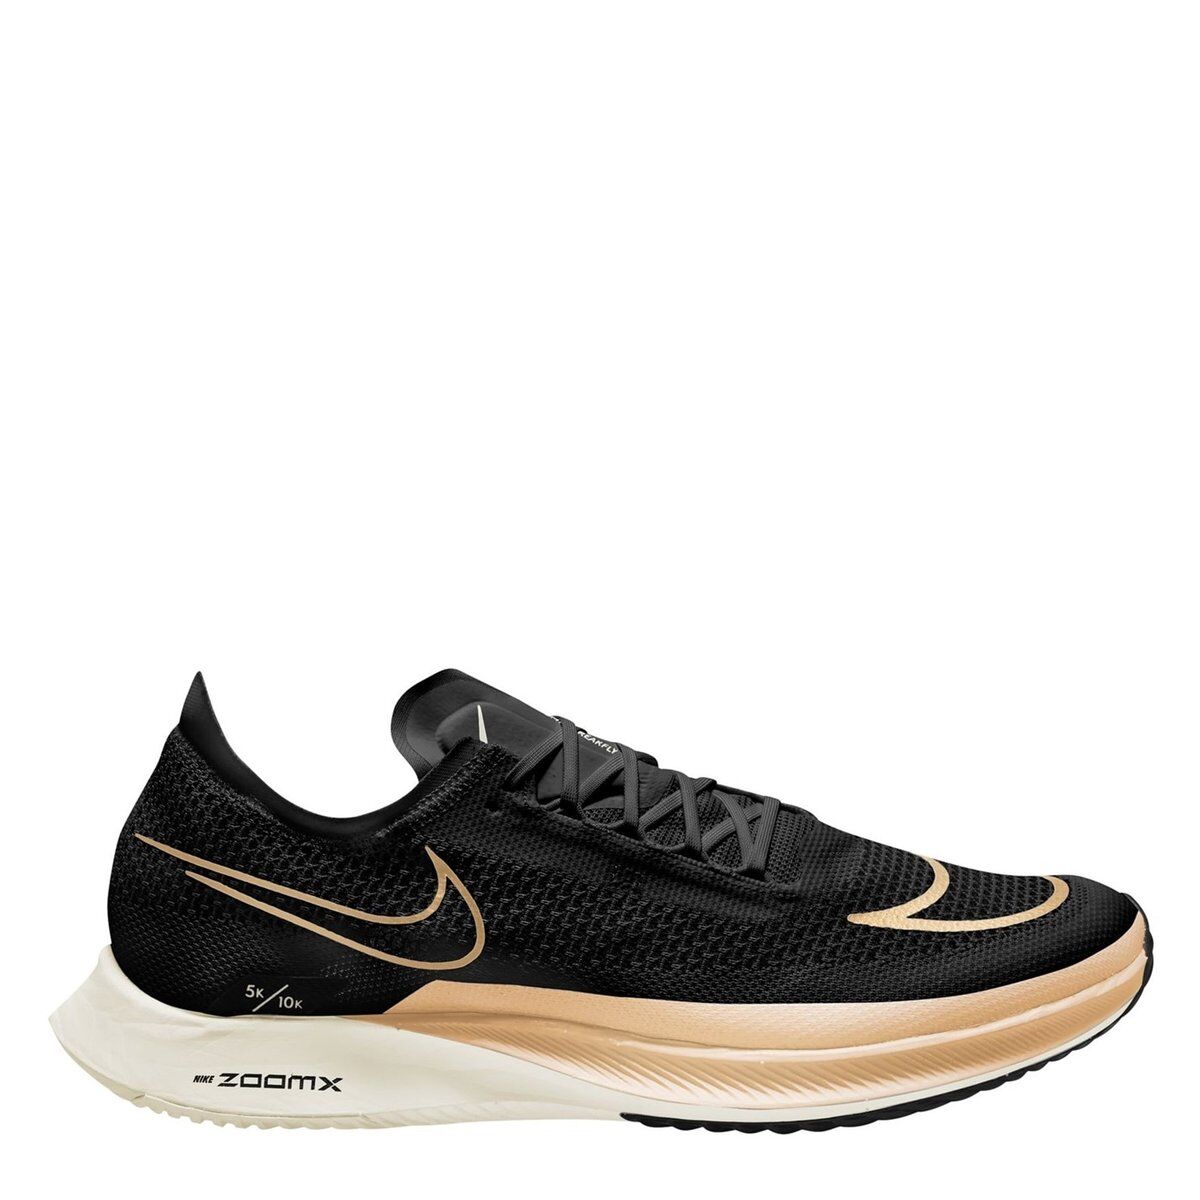 Nike ZoomX Streakfly Mens Running Shoes - male - Black/Gold - 11